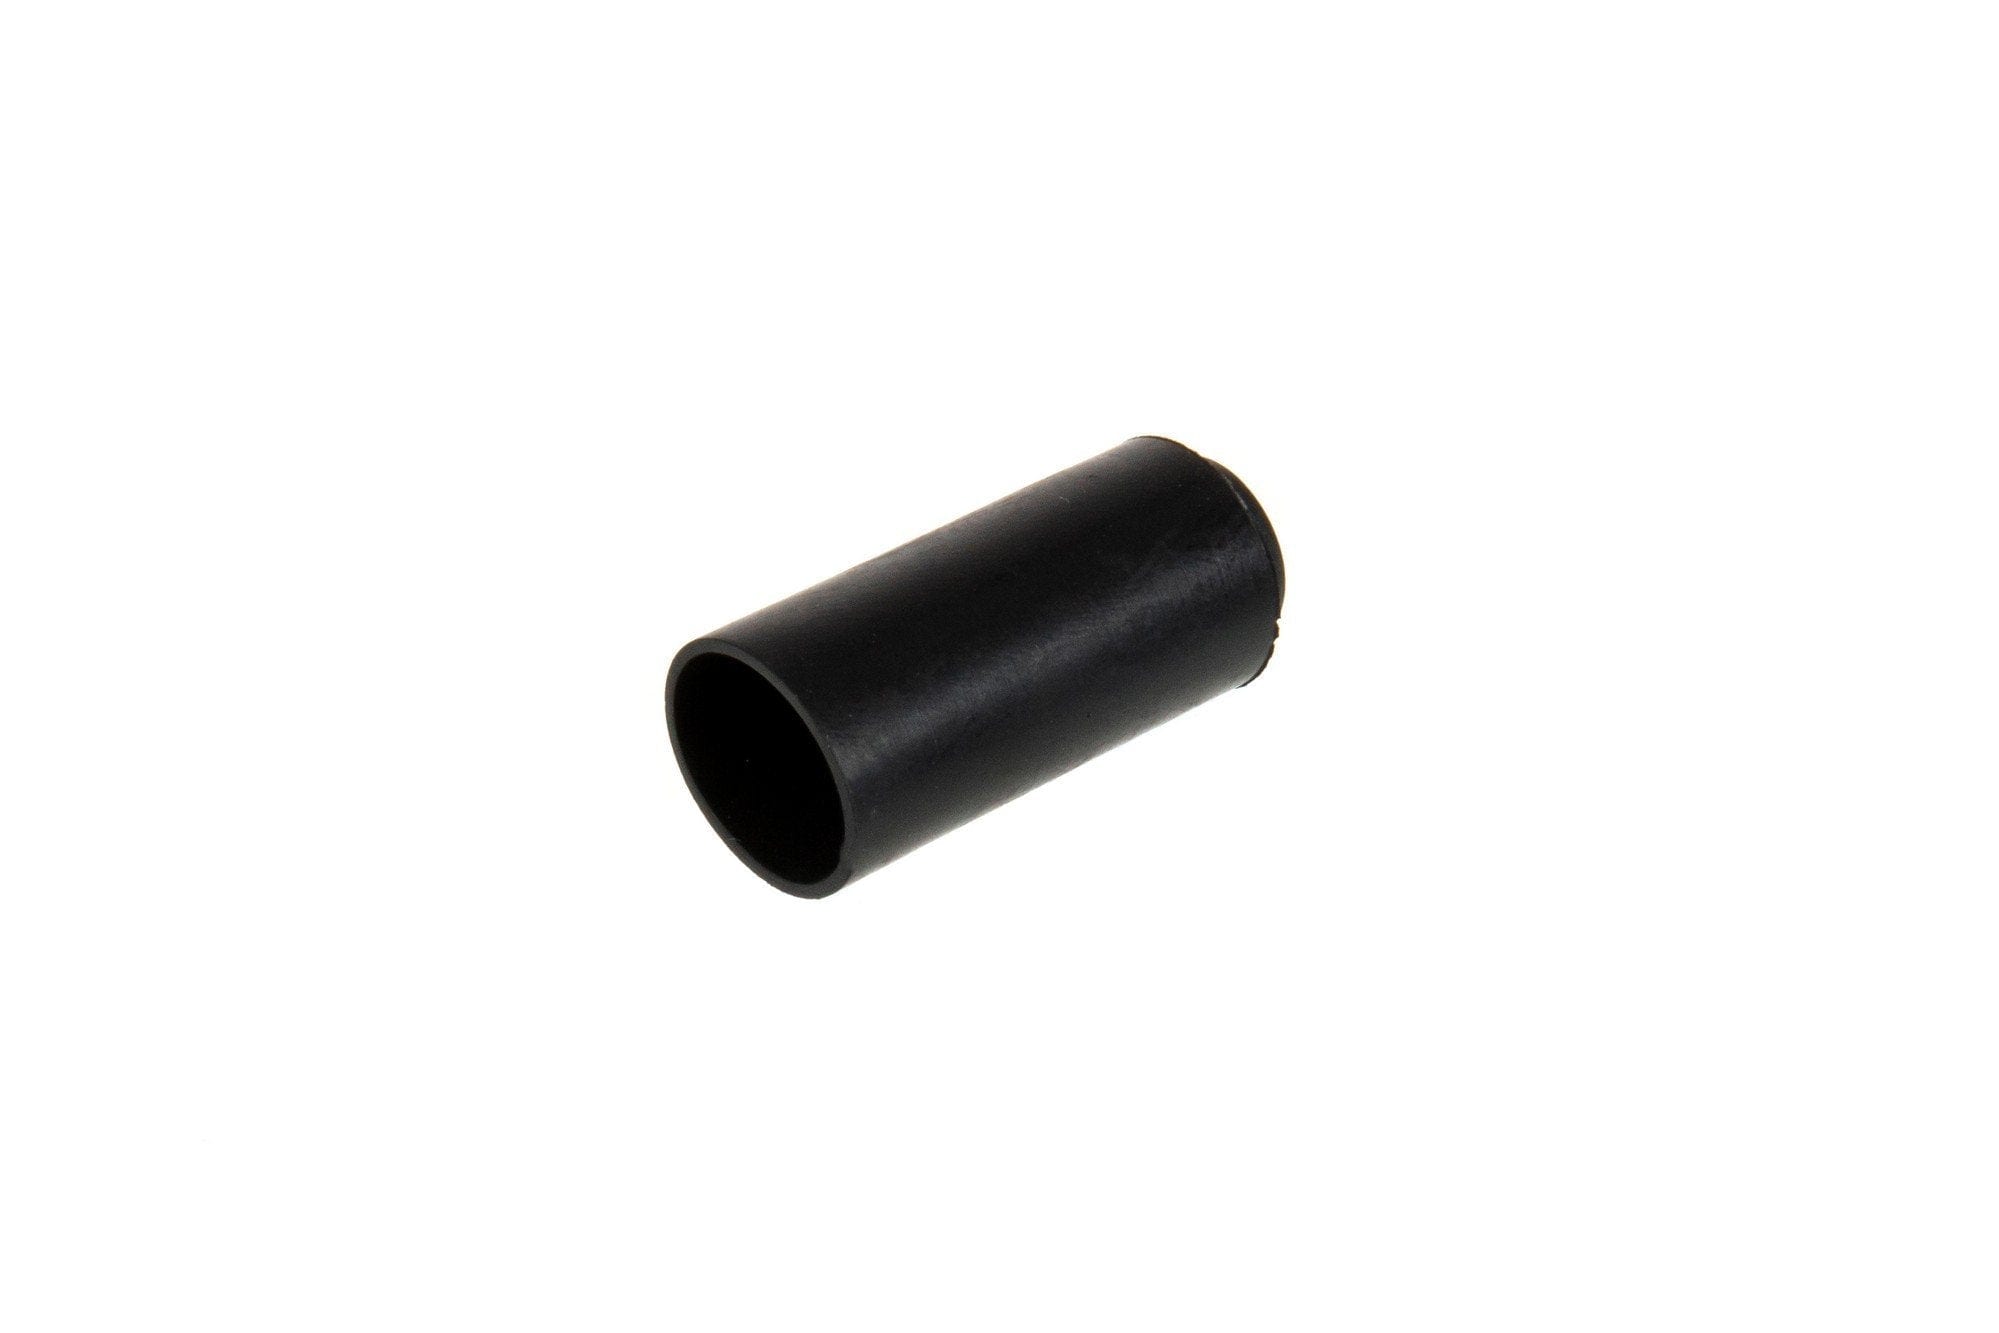 Hop-up rubber 70 ° - black by Specna Arms on Airsoft Mania Europe